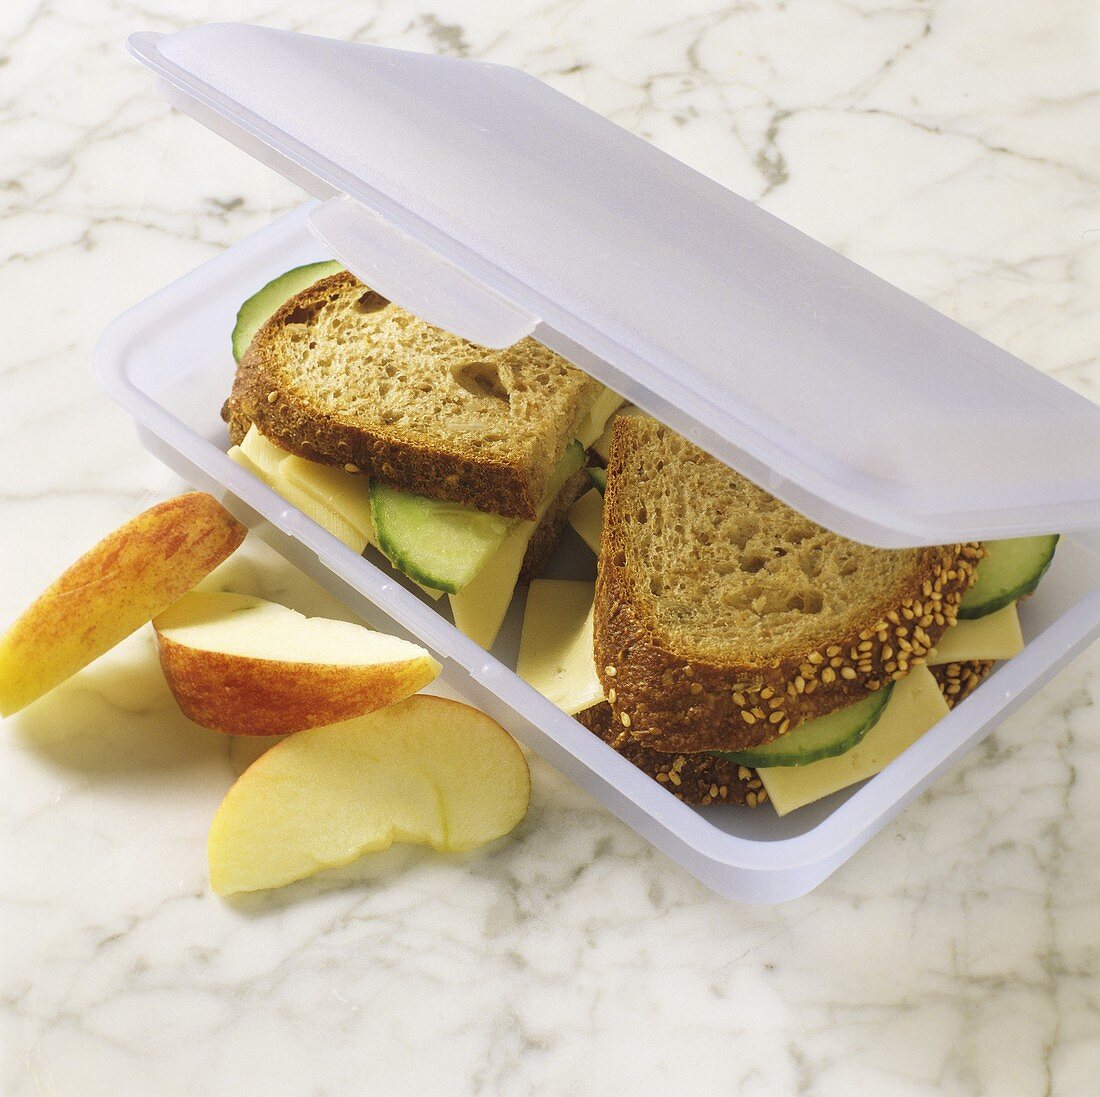 Child's lunchbox with sandwiches and fruit 